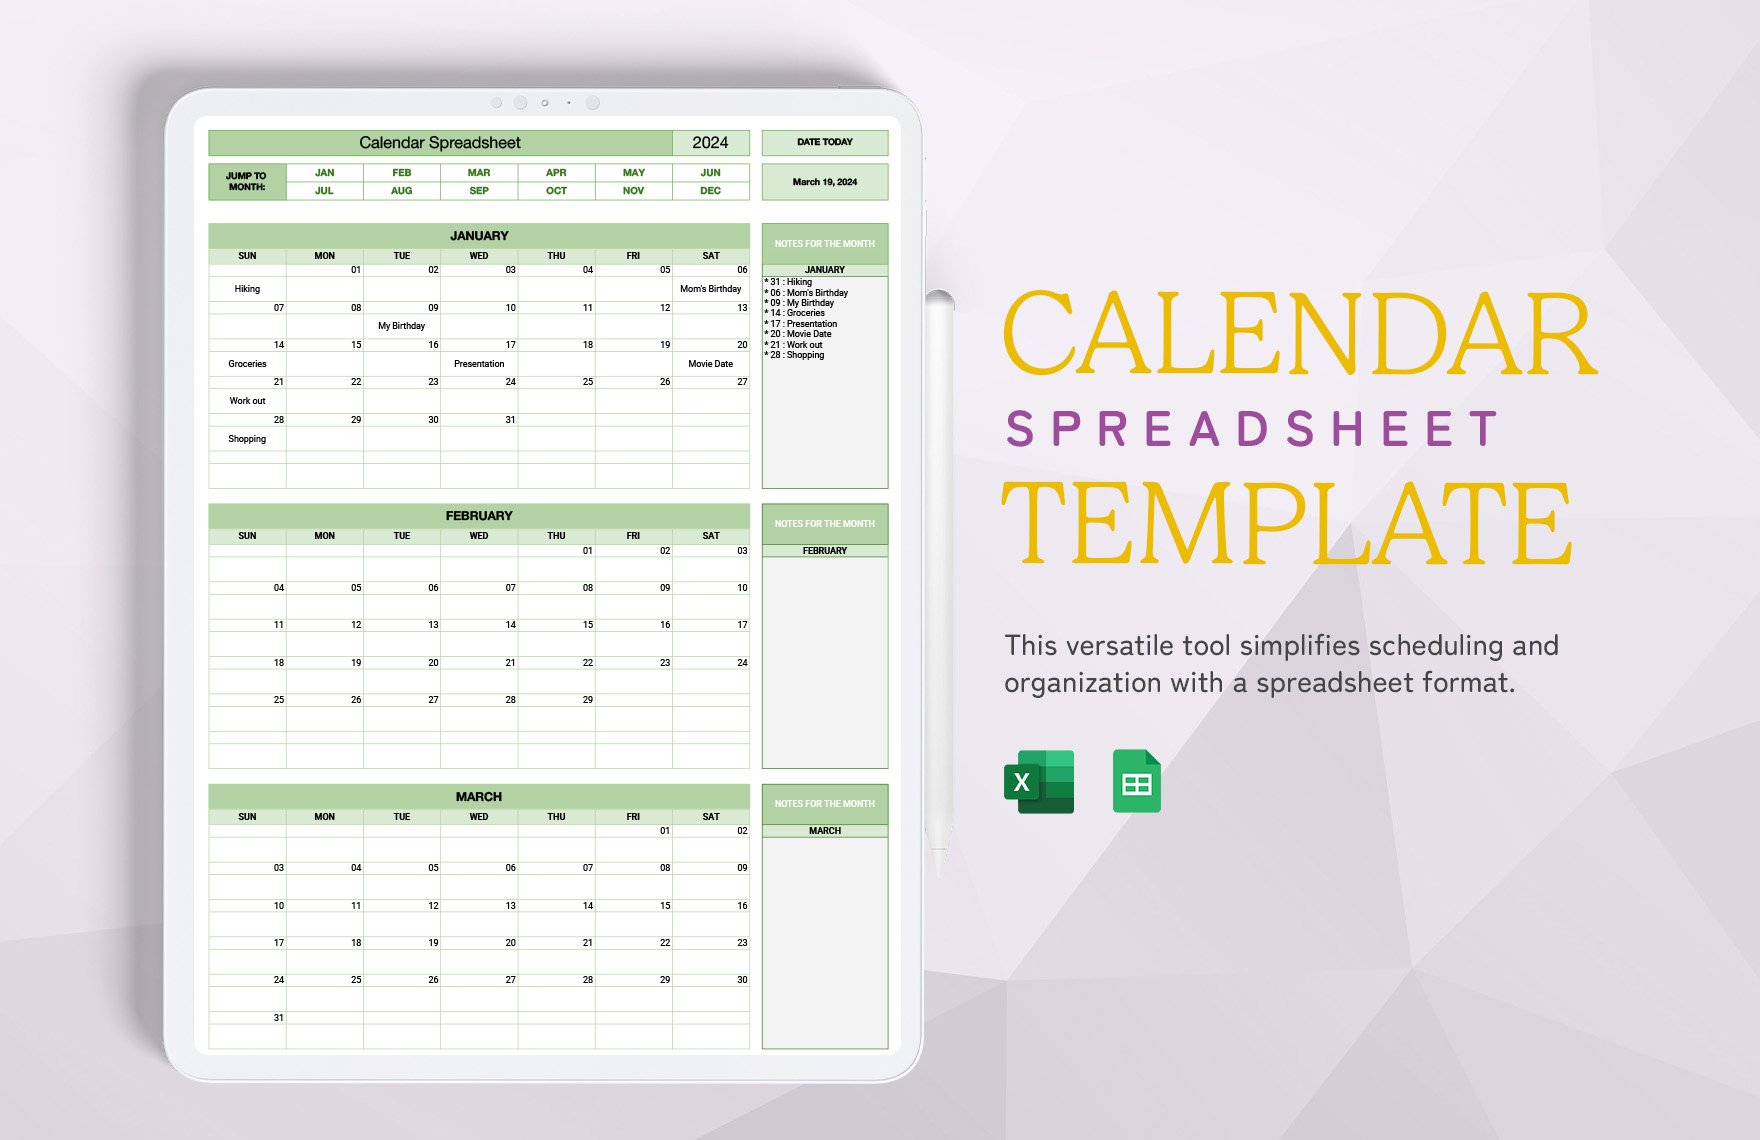 Free Calendar Spreadsheet Template in Excel, Google Sheets